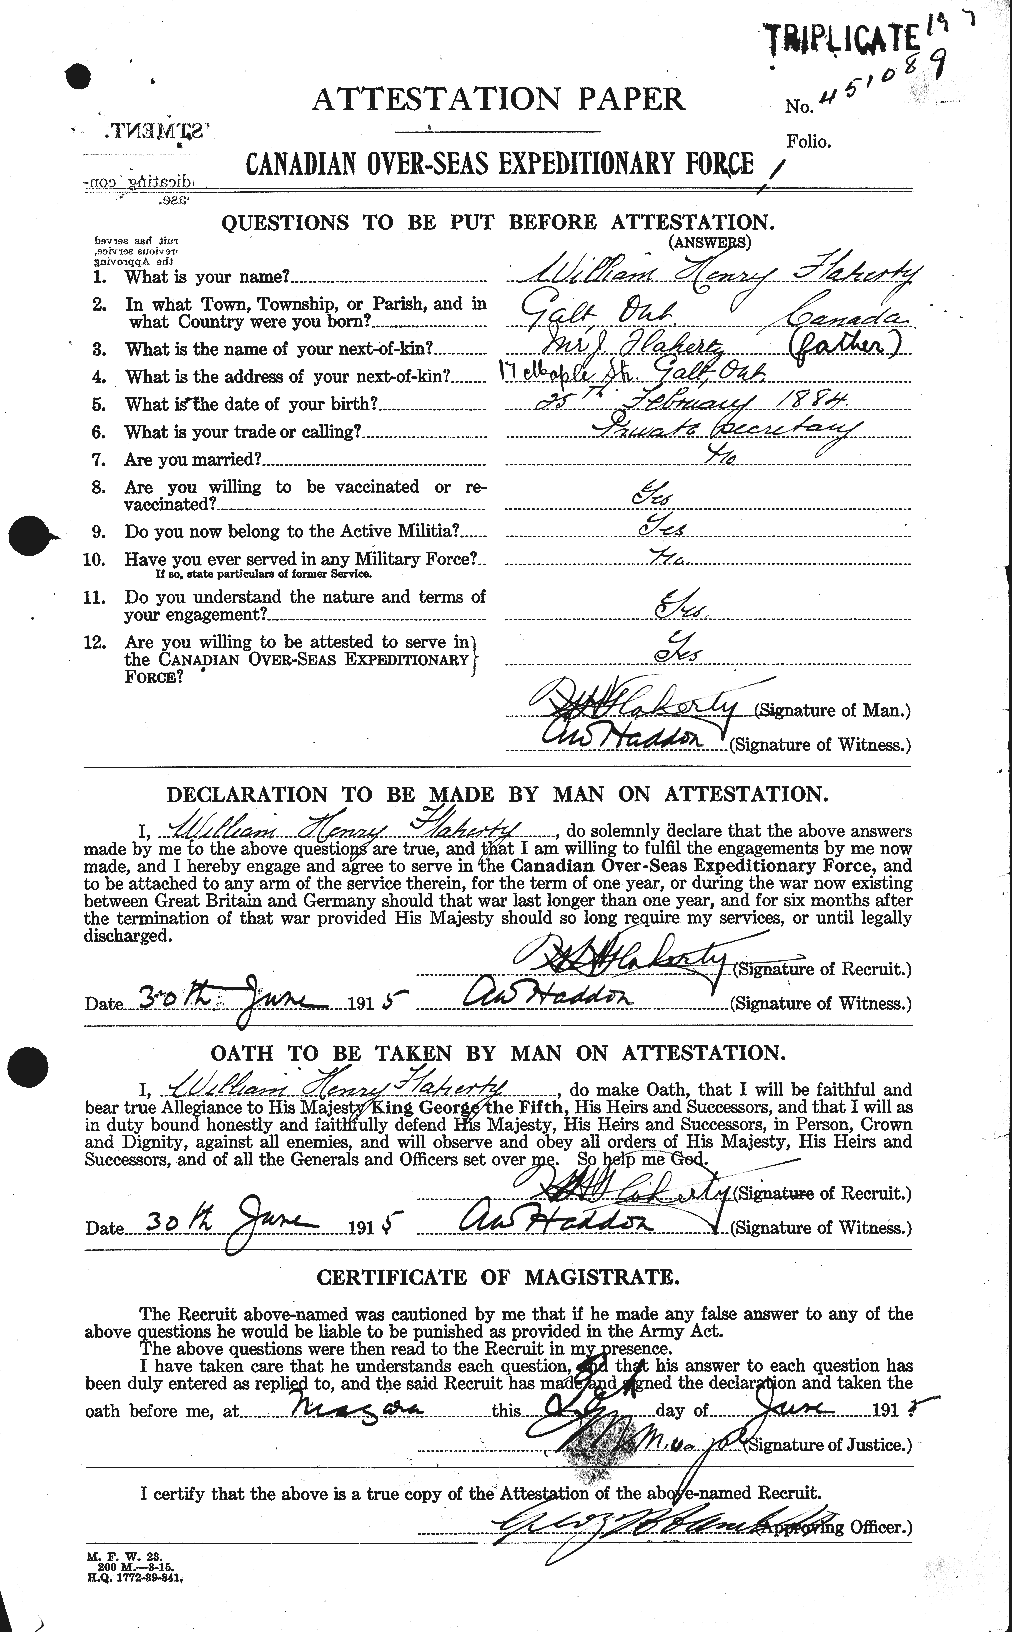 Personnel Records of the First World War - CEF 323385a